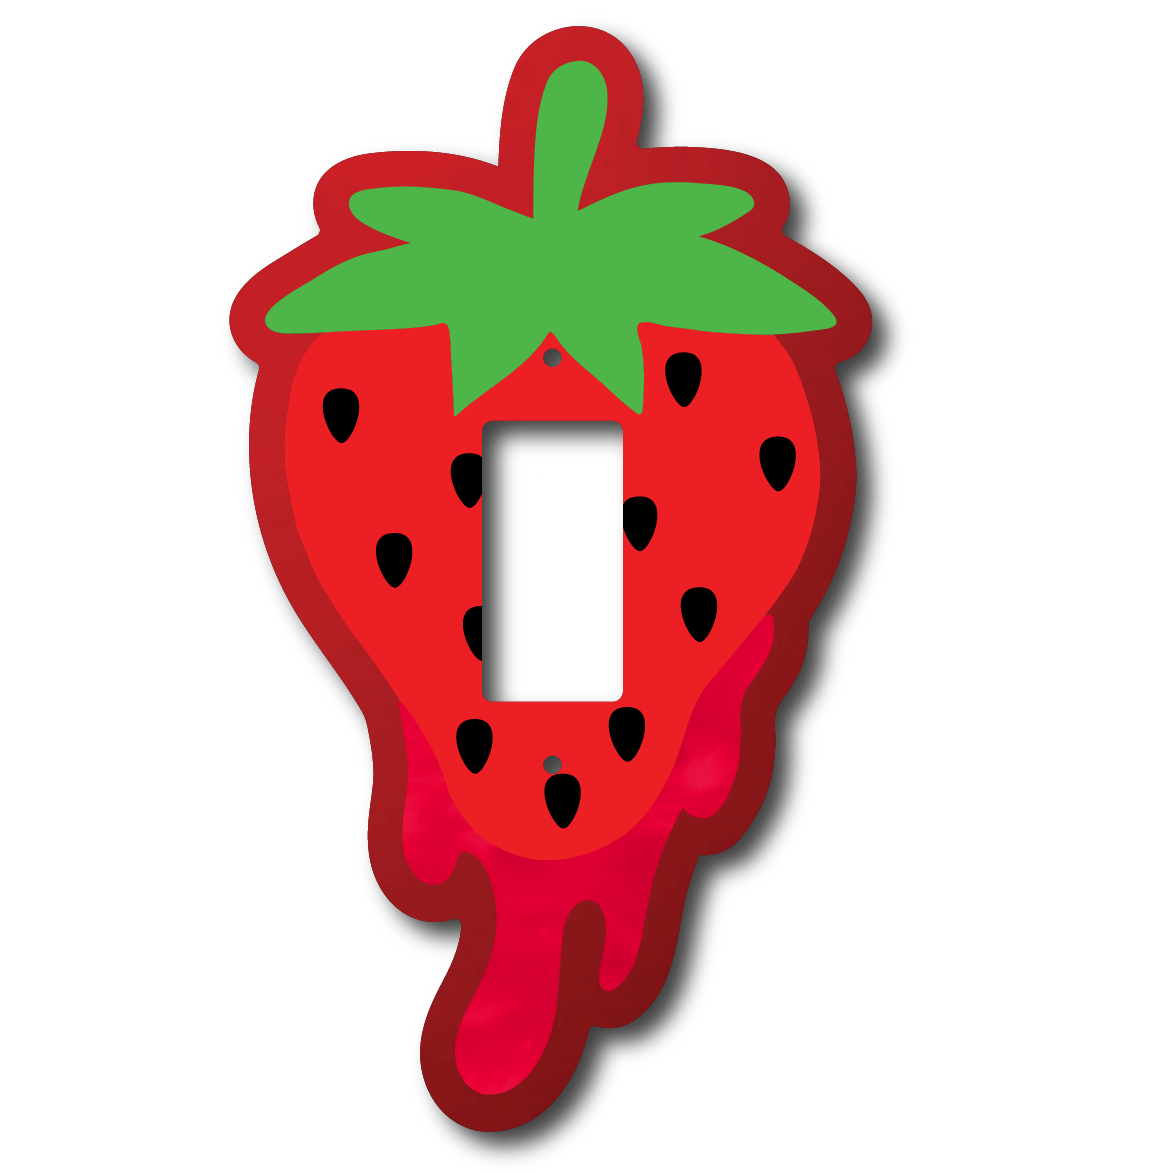 The Strawberry Light Switch Cover